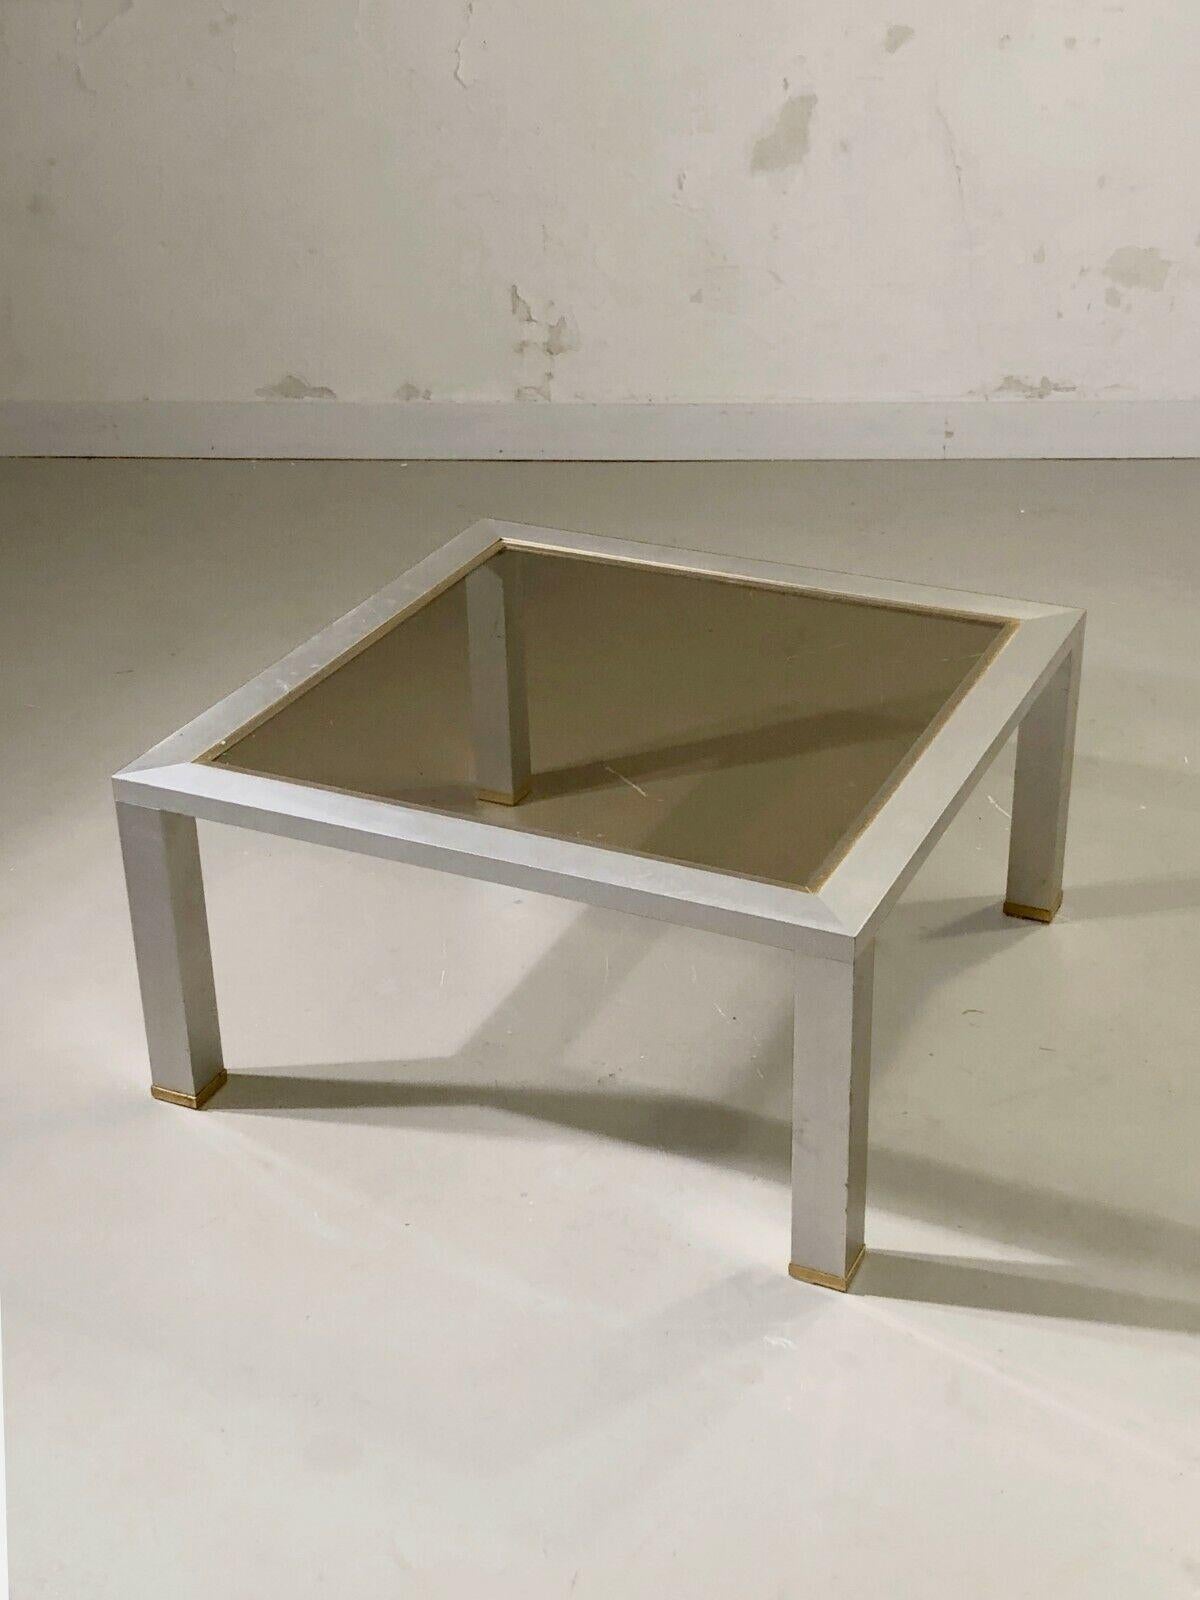 Brass A Square RADICAL POSTMODERN Side on COFFEE TABLE, by PIERRE VANDEL, France 1970 For Sale